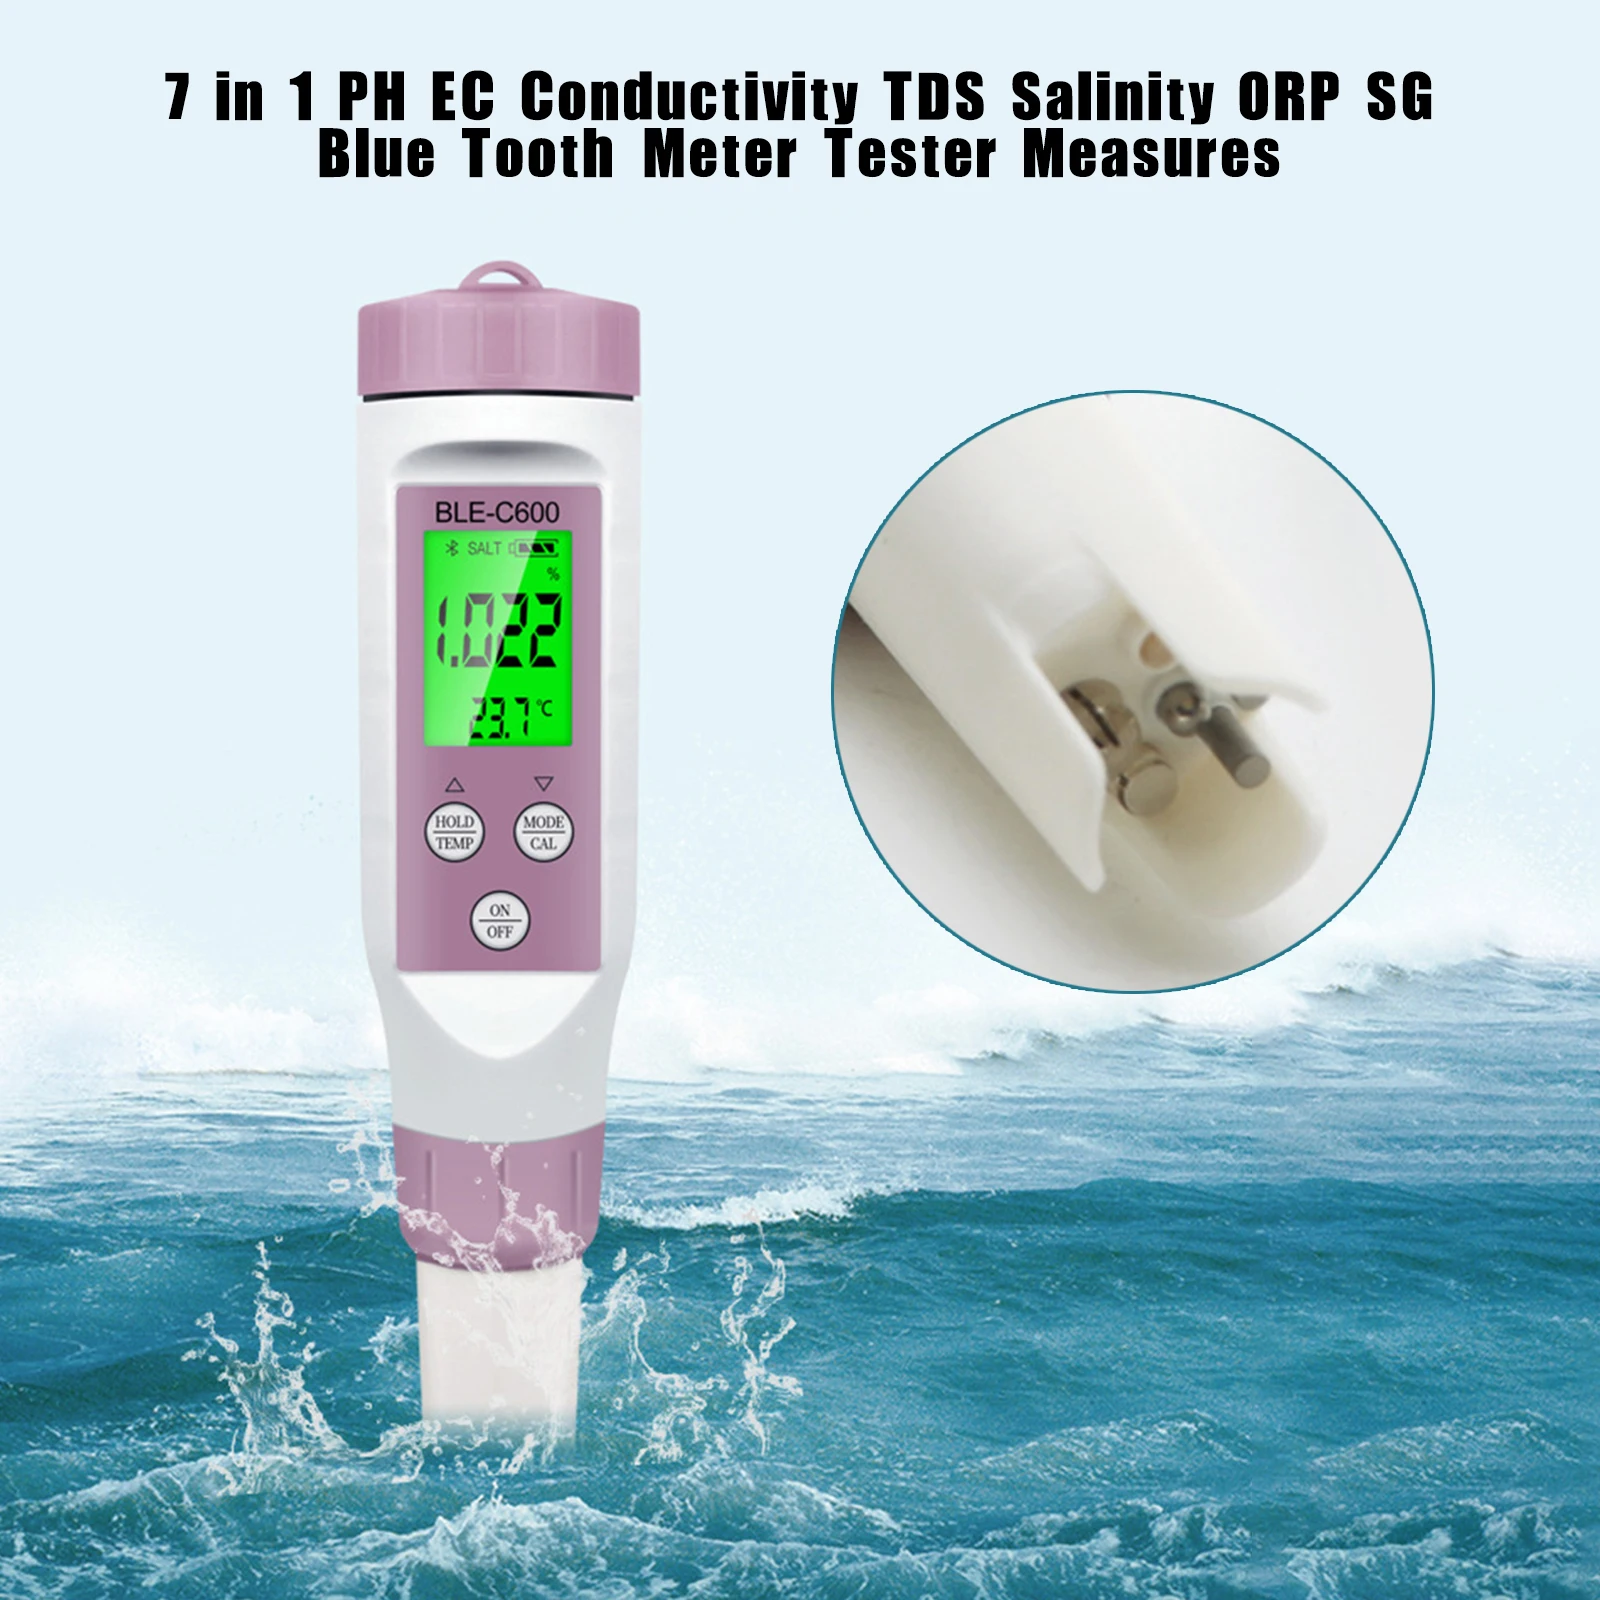 

Areyourshop 7 In 1 PH EC Conductivity TDS Salinity ORP SG Blue Tooth Meter Tester Measures